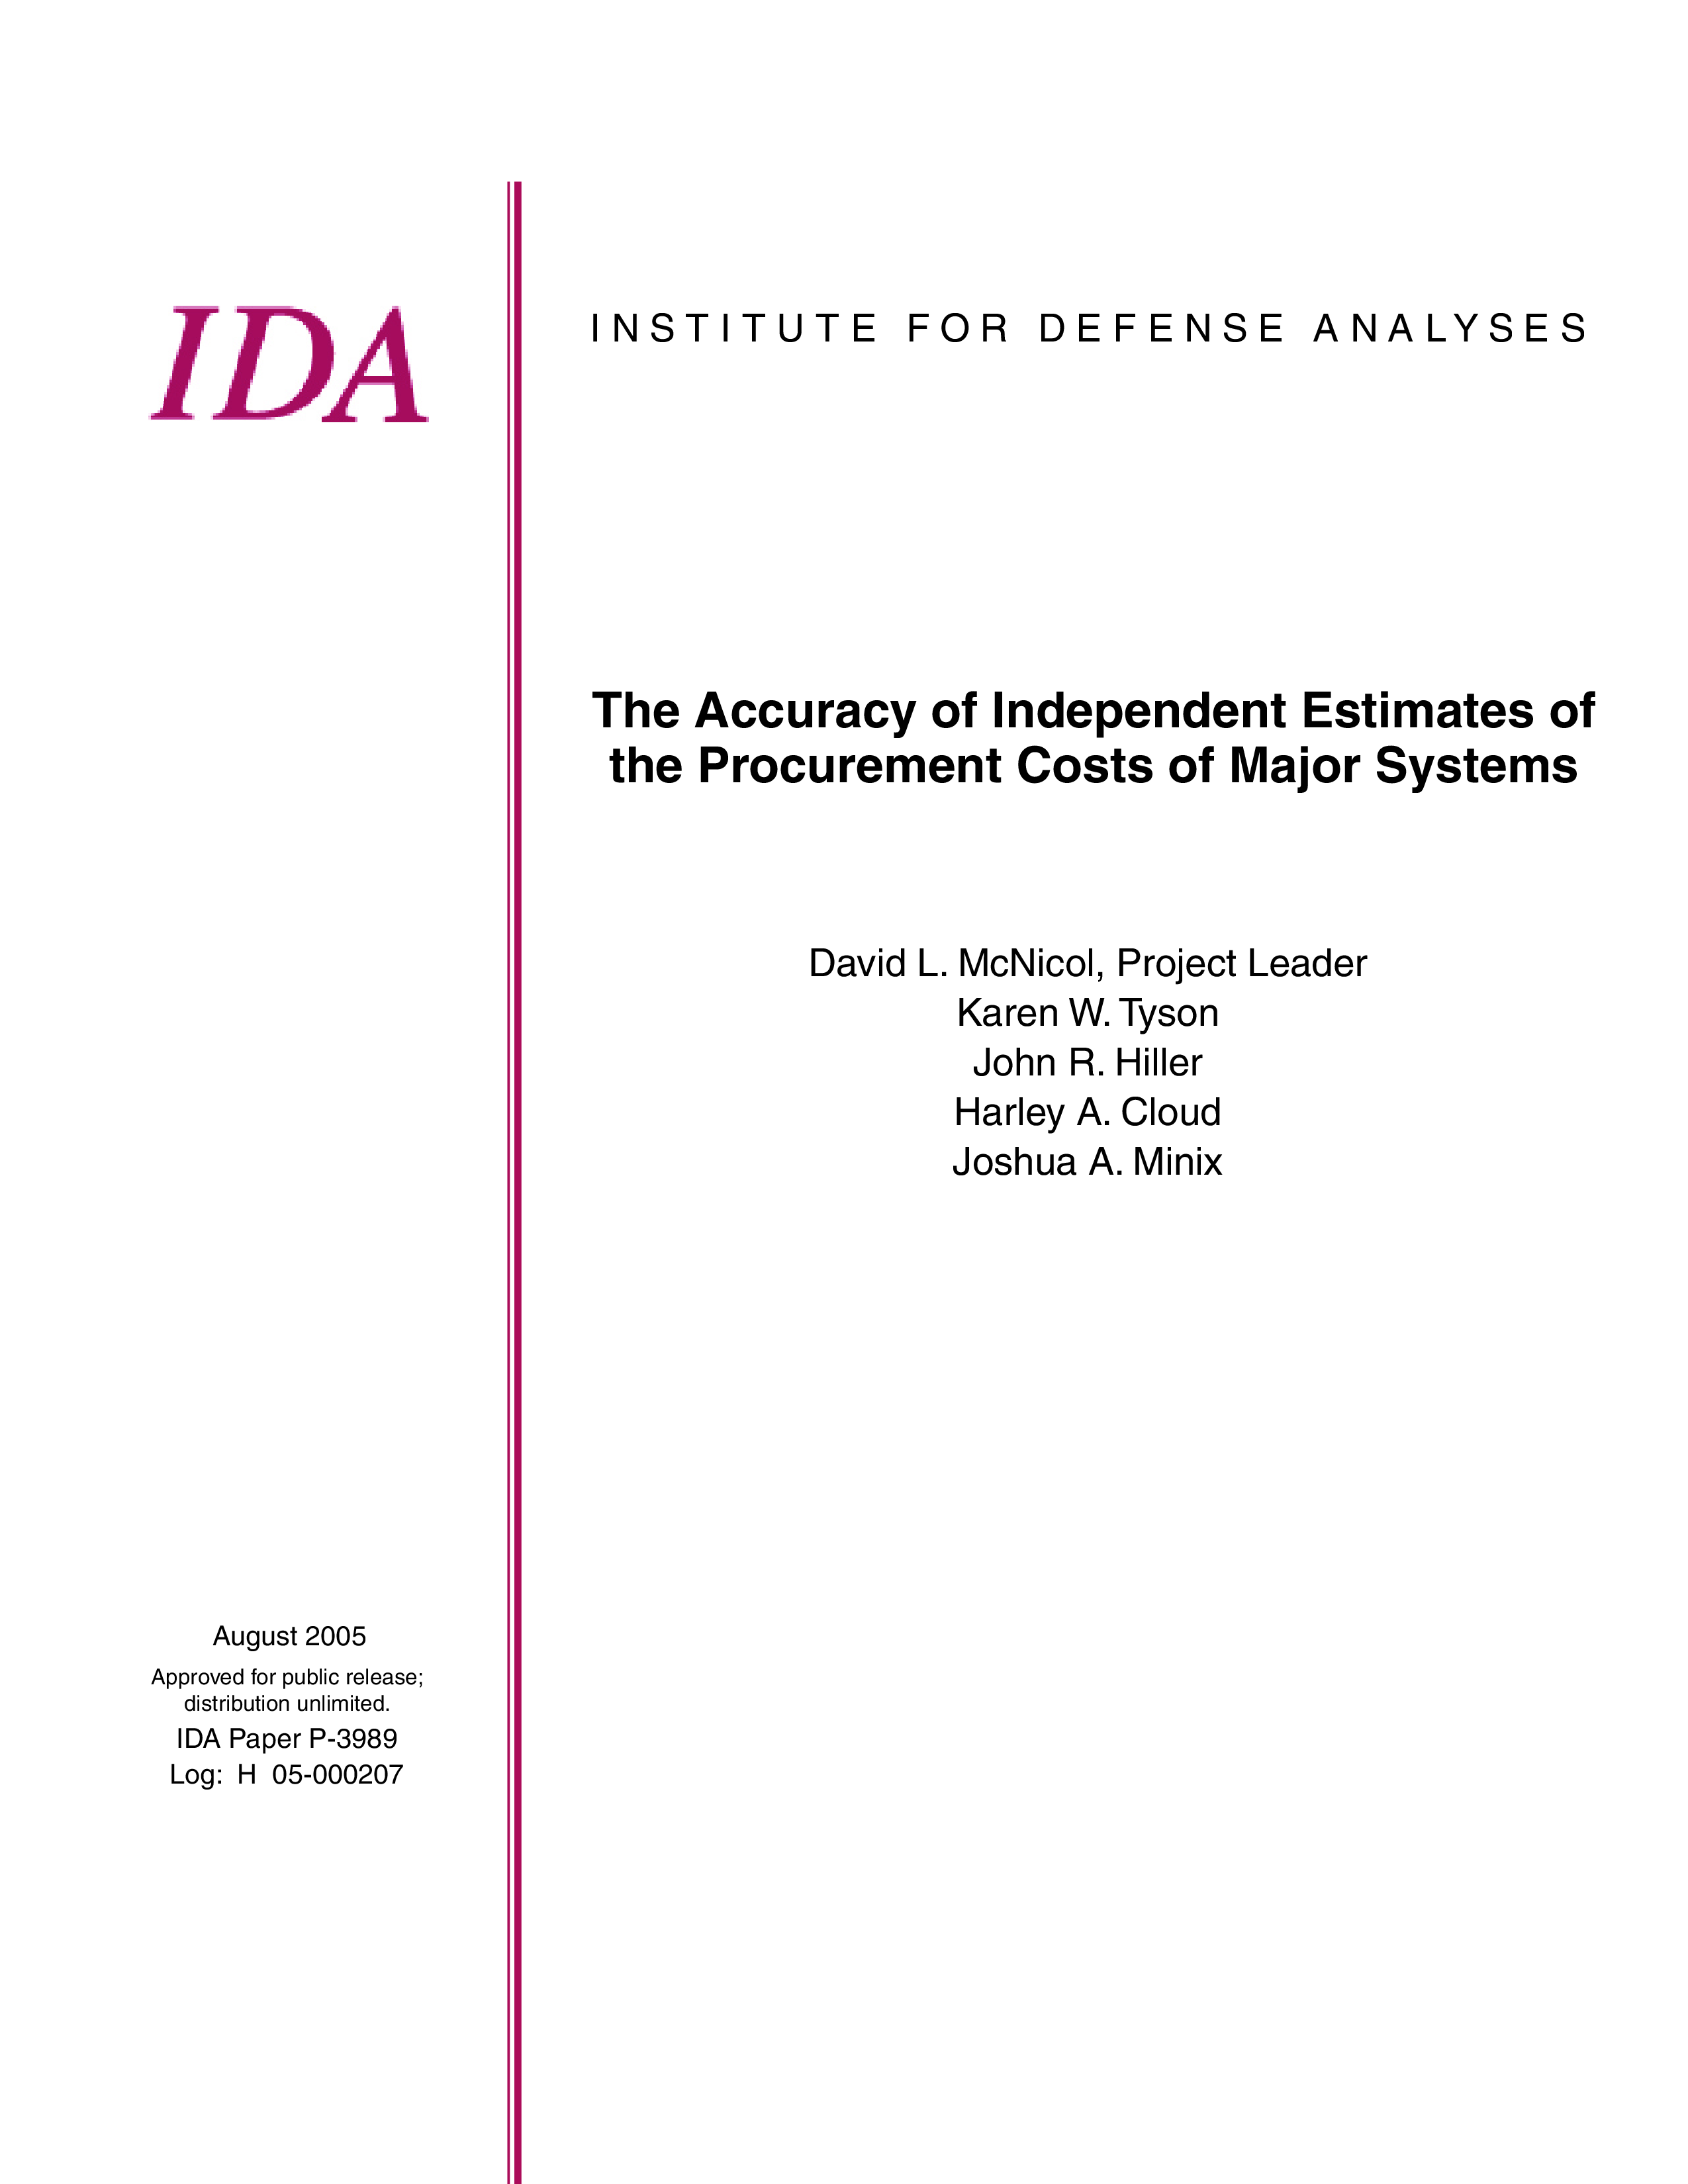 The Accuracy of Independent Estimates of the Procurement Costs of Major Systems